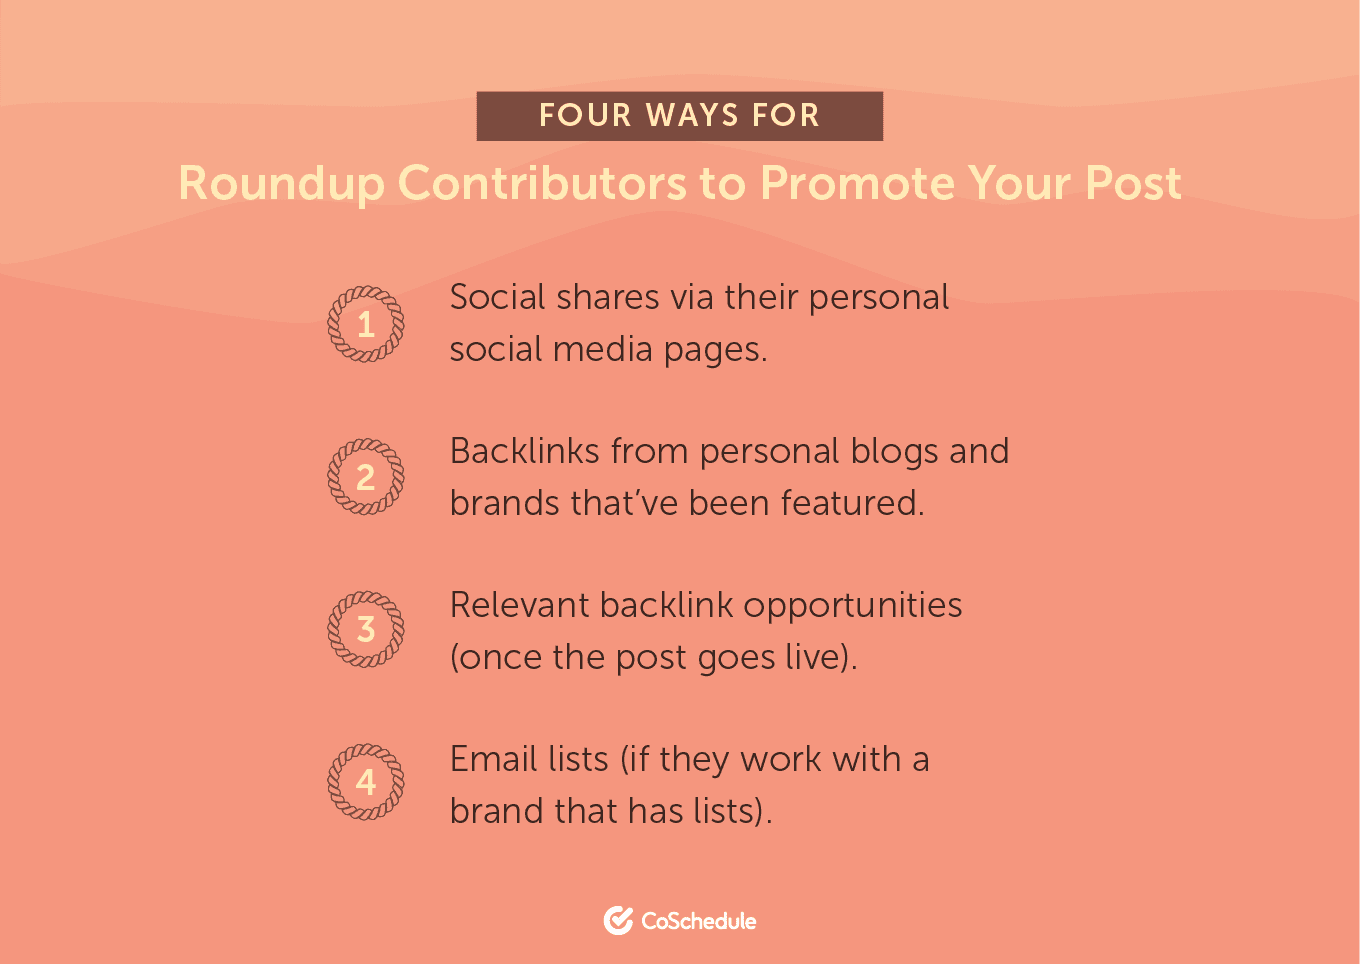 Four Ways for Roundup Contributors to Promote Your Posts